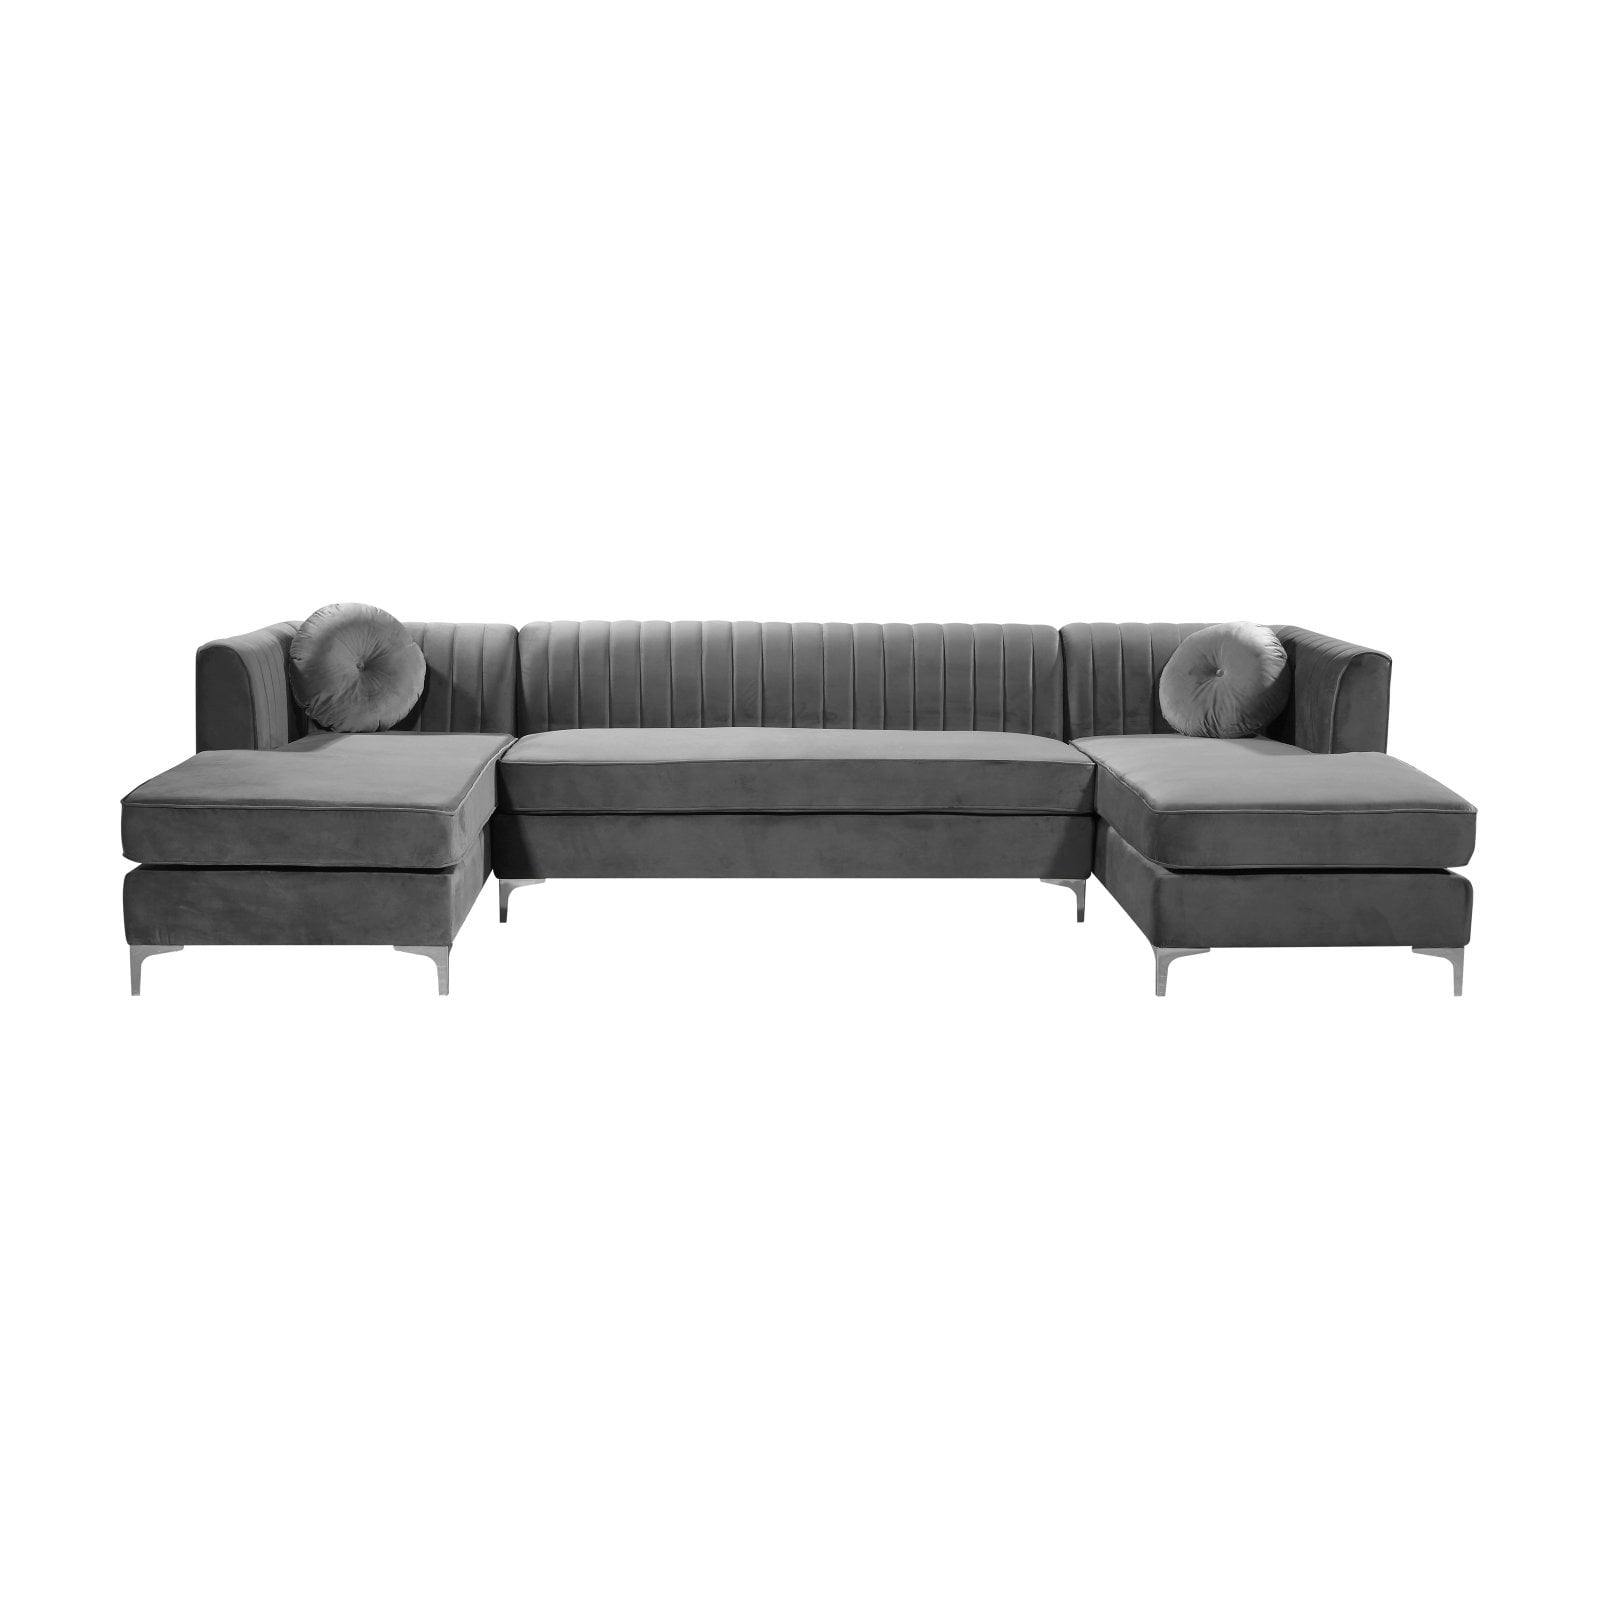 Elegant Gray Velvet Tufted Three-Piece Sectional with Solid Wood Frame